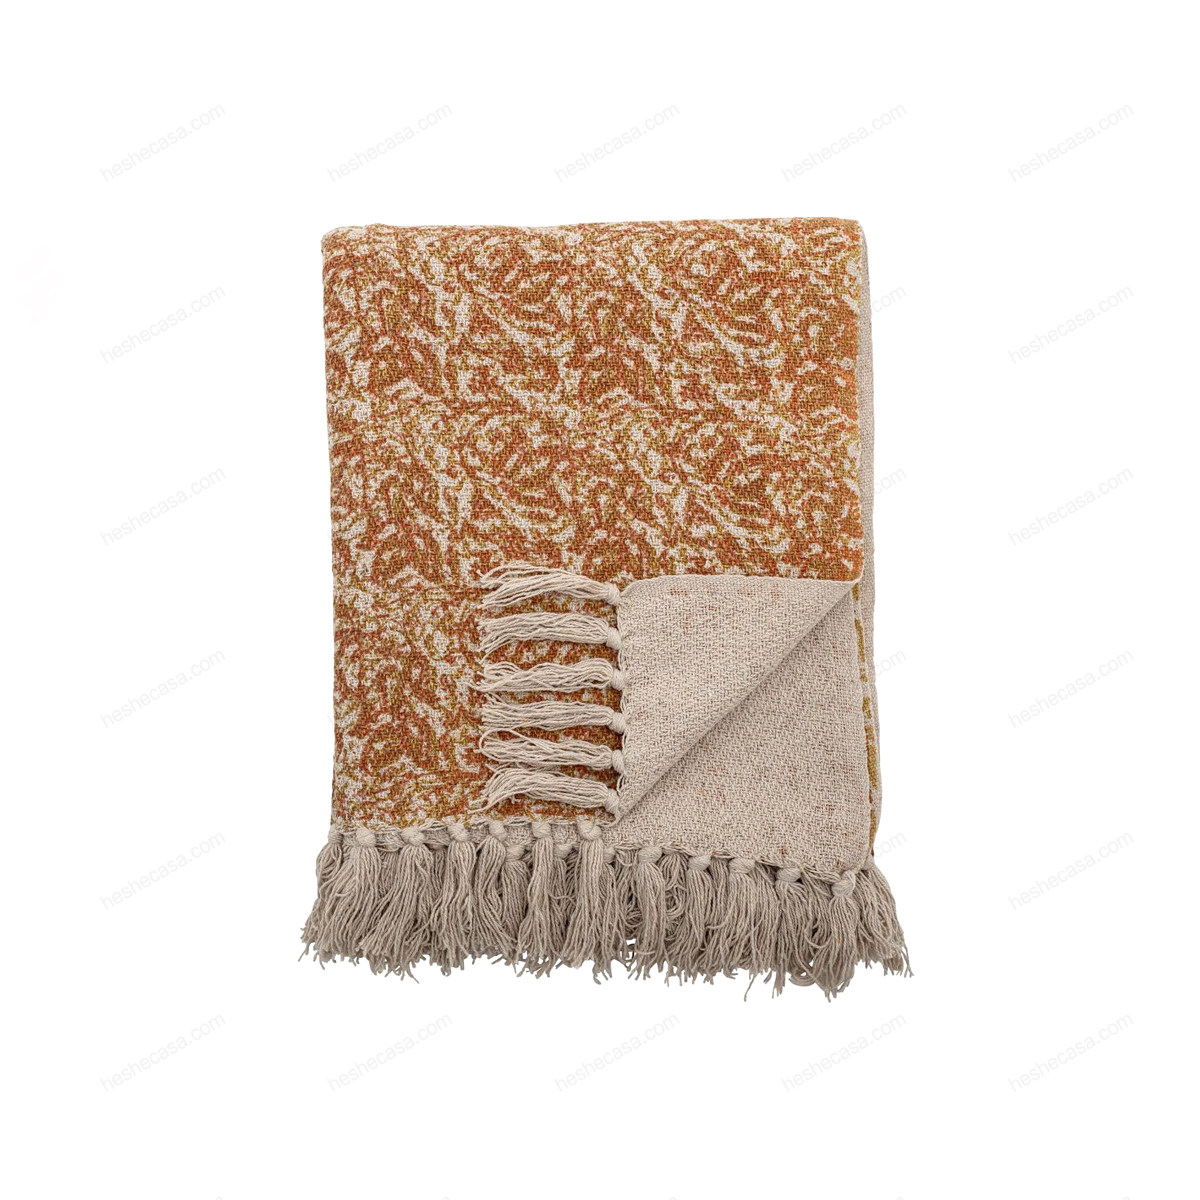 Cianna Throw, Brown, Recycled Cotton 毯子